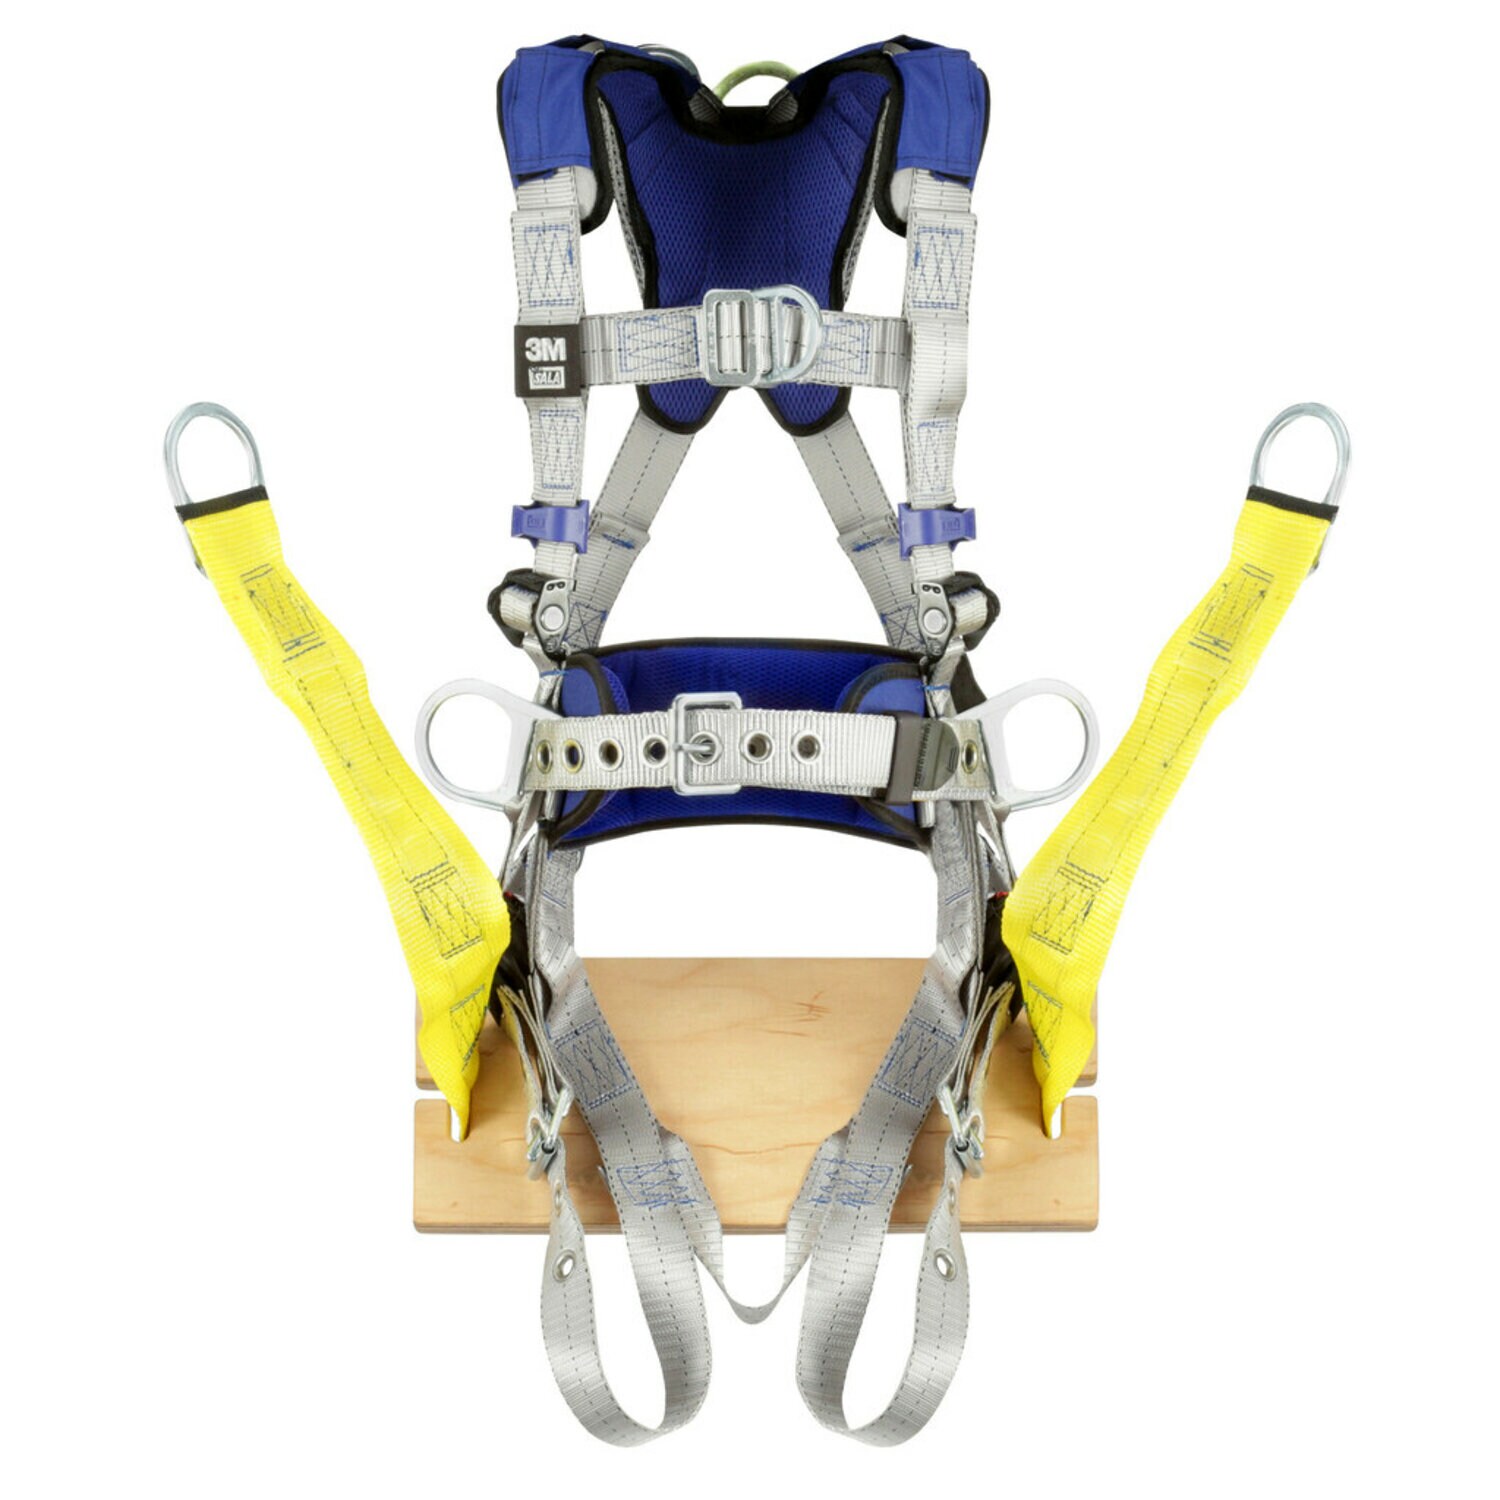 7012817628 - 3M DBI-SALA ExoFit X100 Comfort Construction Oil and Gas Climbing/Positioning/Suspension Safety Harness 1401146, Medium